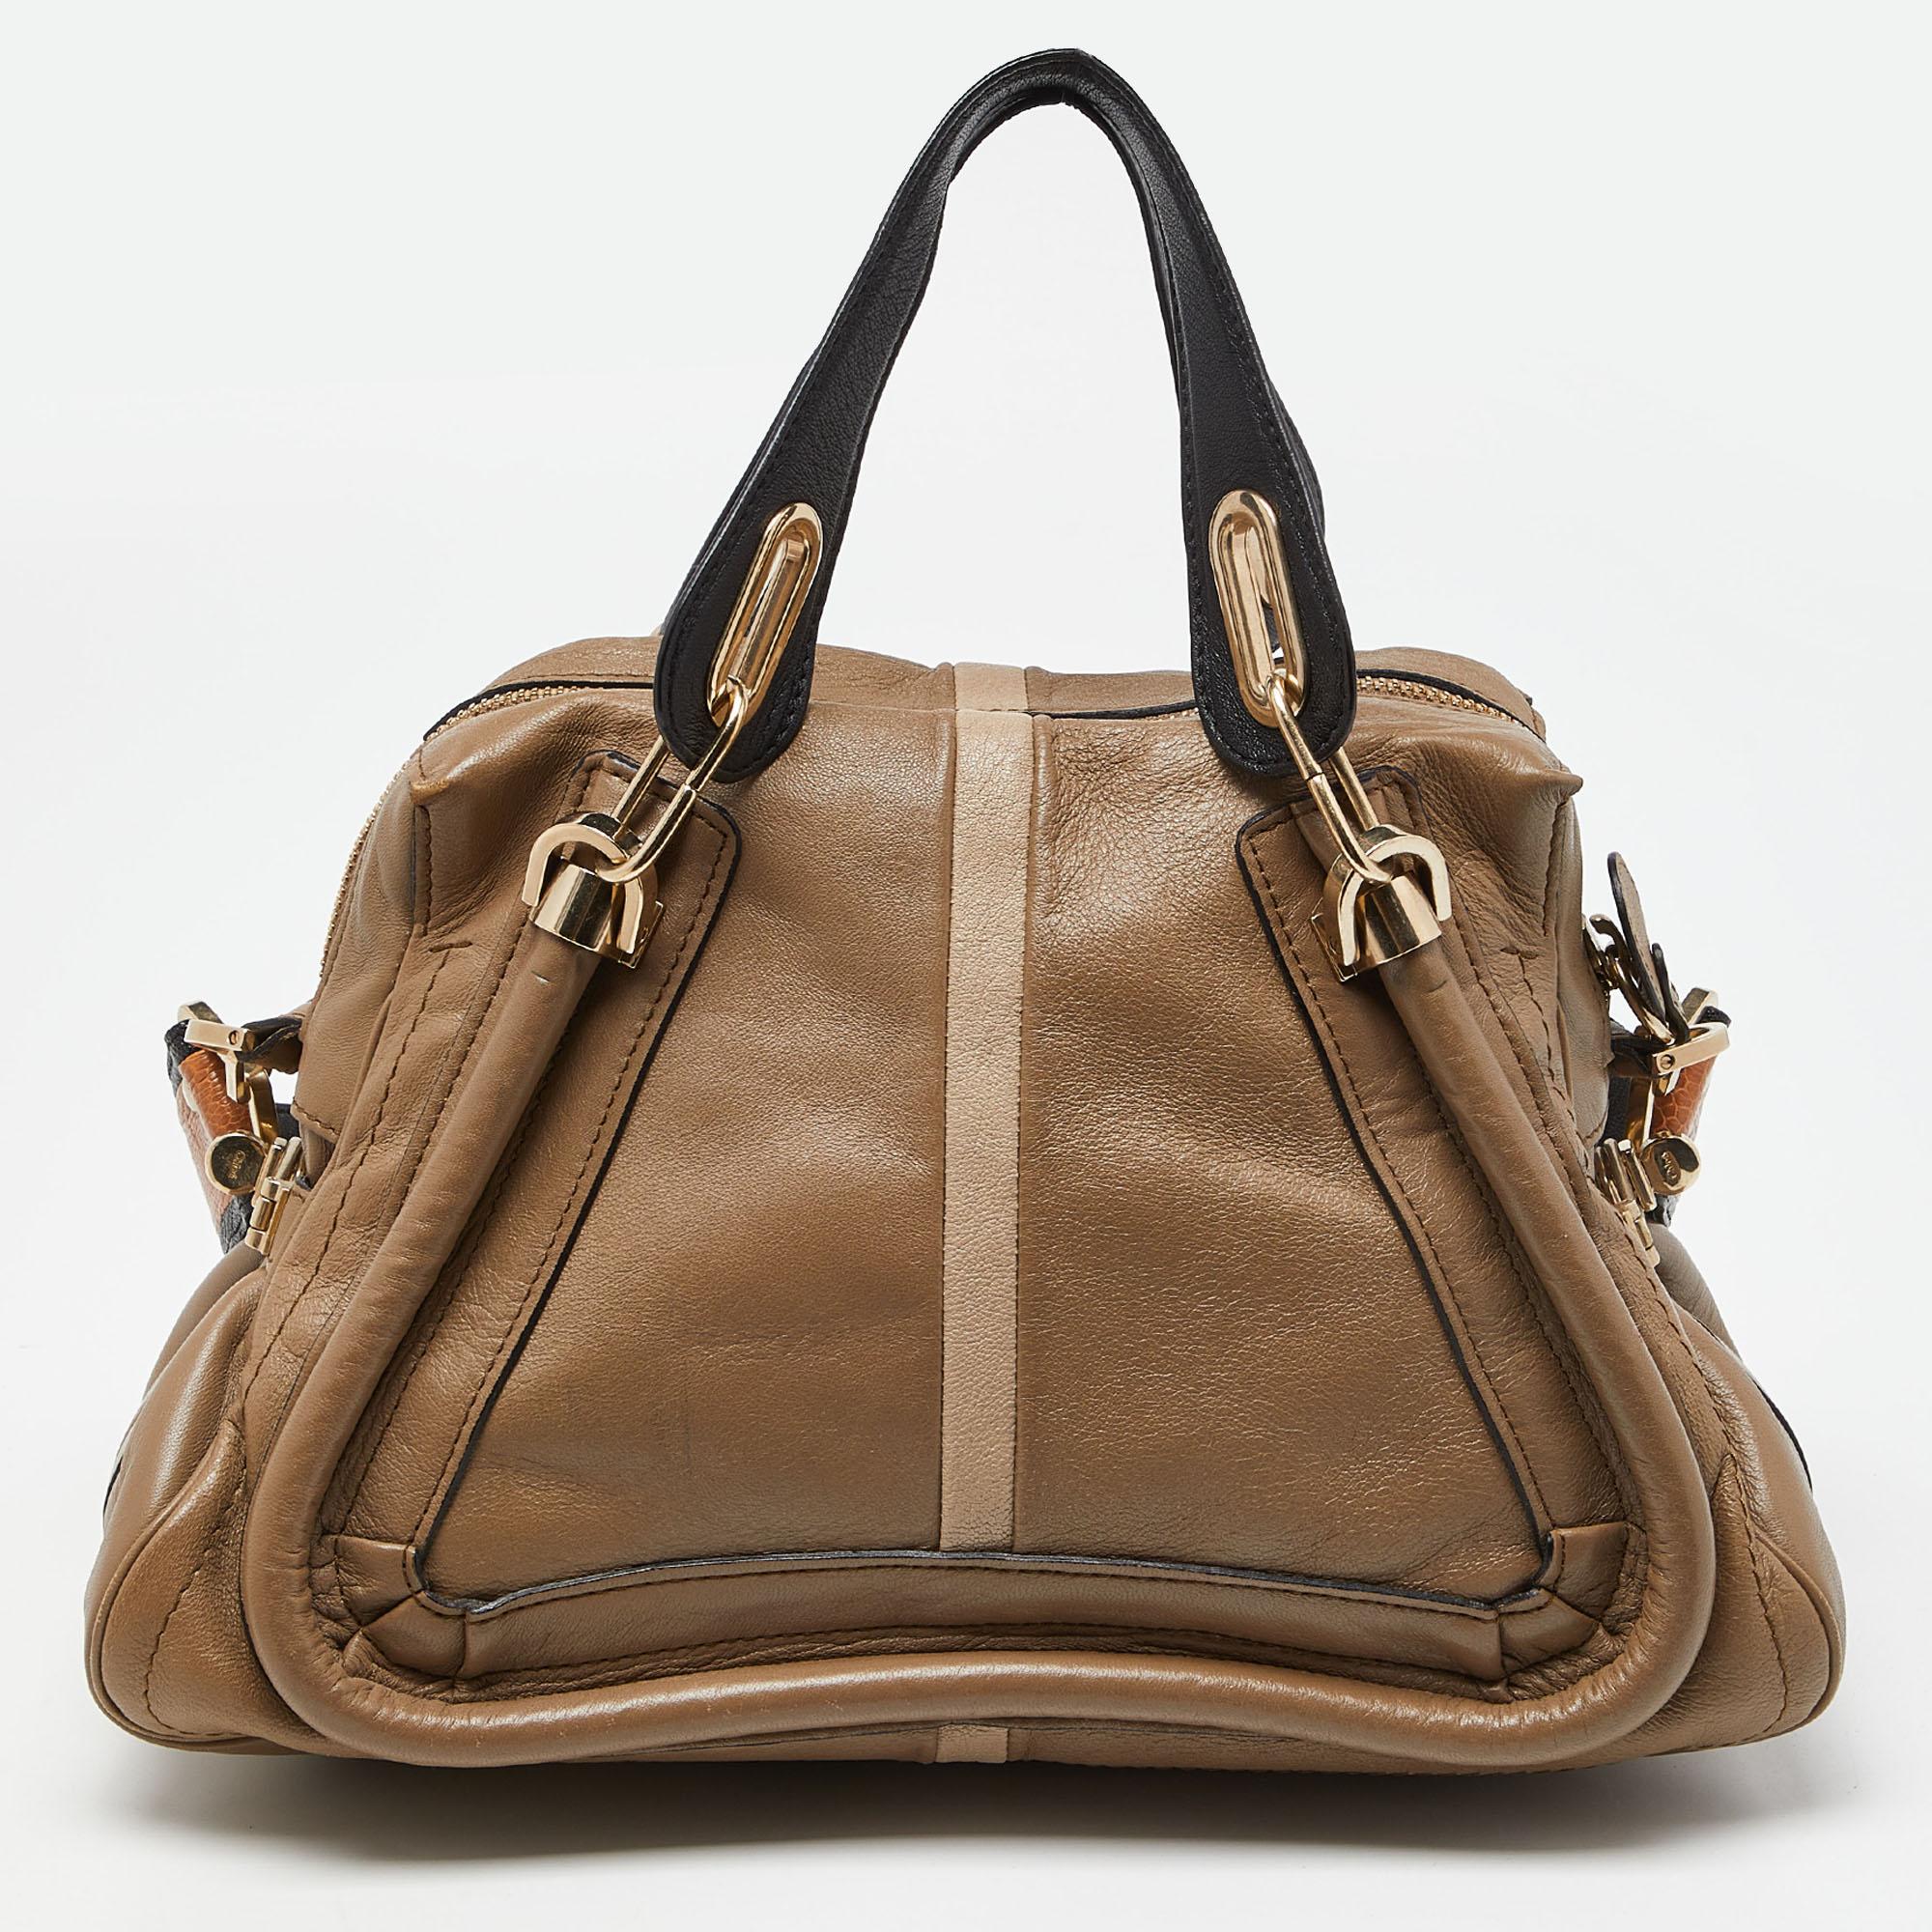 Practical and chic are some words that describe this bag! Crafted meticulously, the creation is equipped with a well-spaced interior and an easy-to-carry experience. Carry it to casual outings or shopping sprees, you'll look stylish!

Includes: